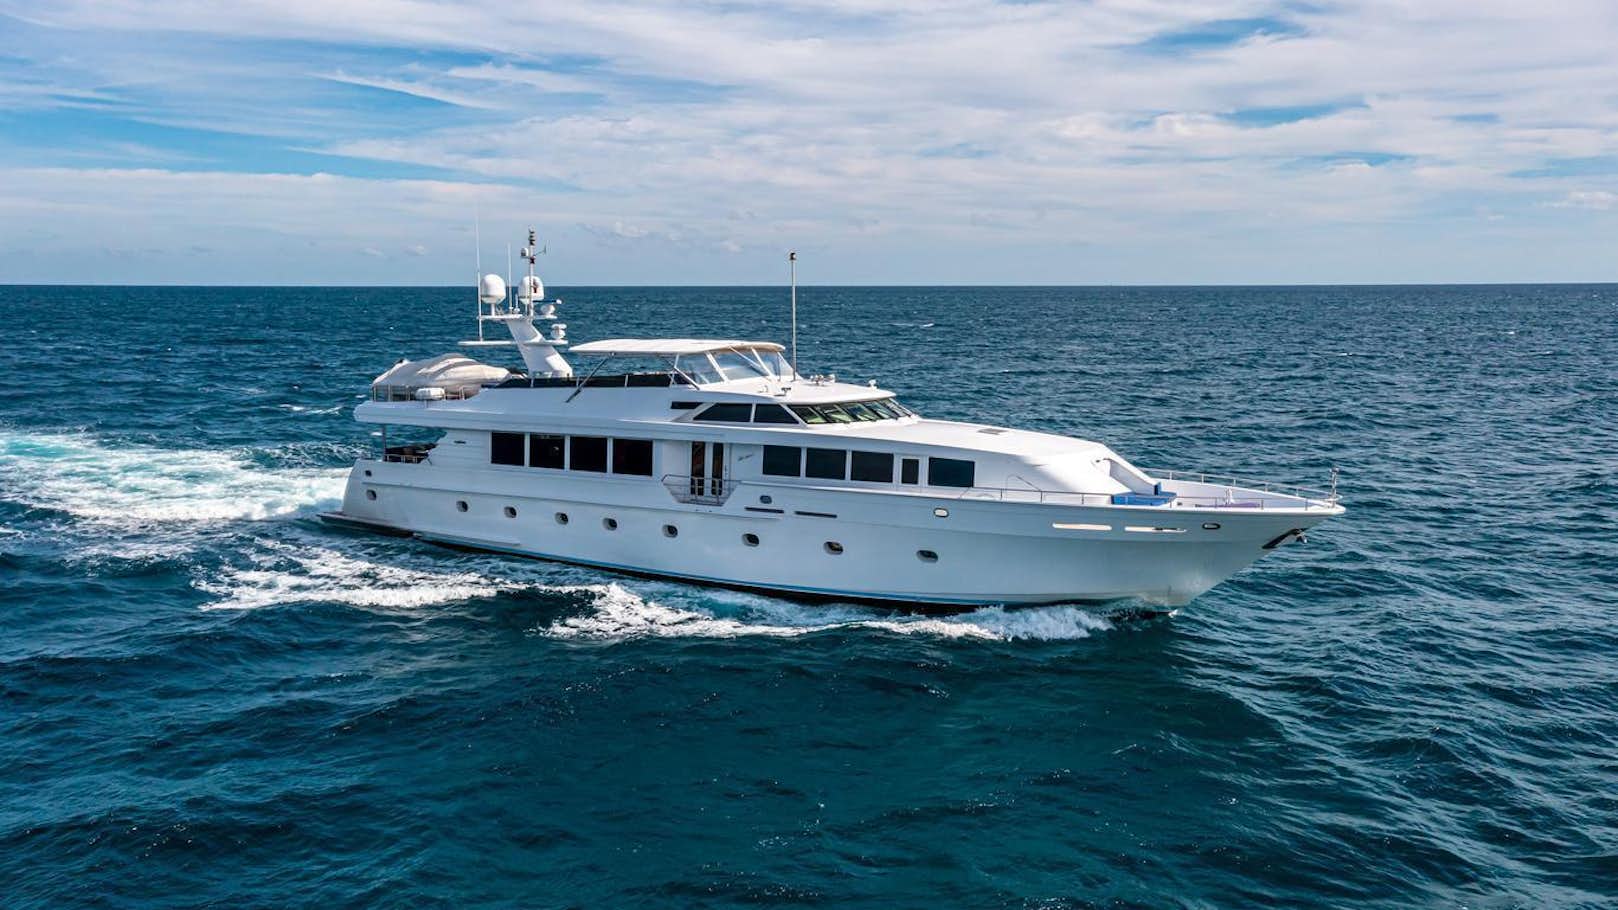 Watch Video for XOXO (118') Yacht for Charter